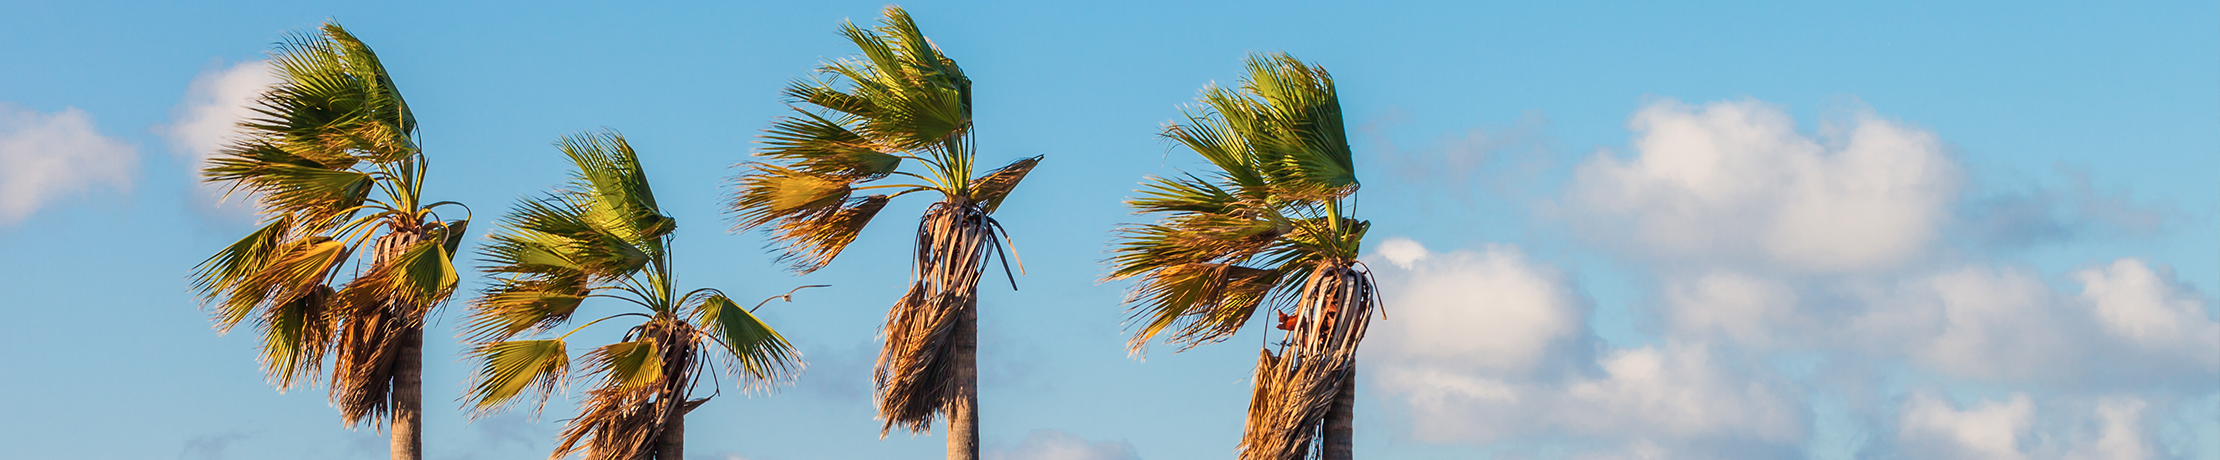 Palm trees on blue sky in Bronwsville, Texas